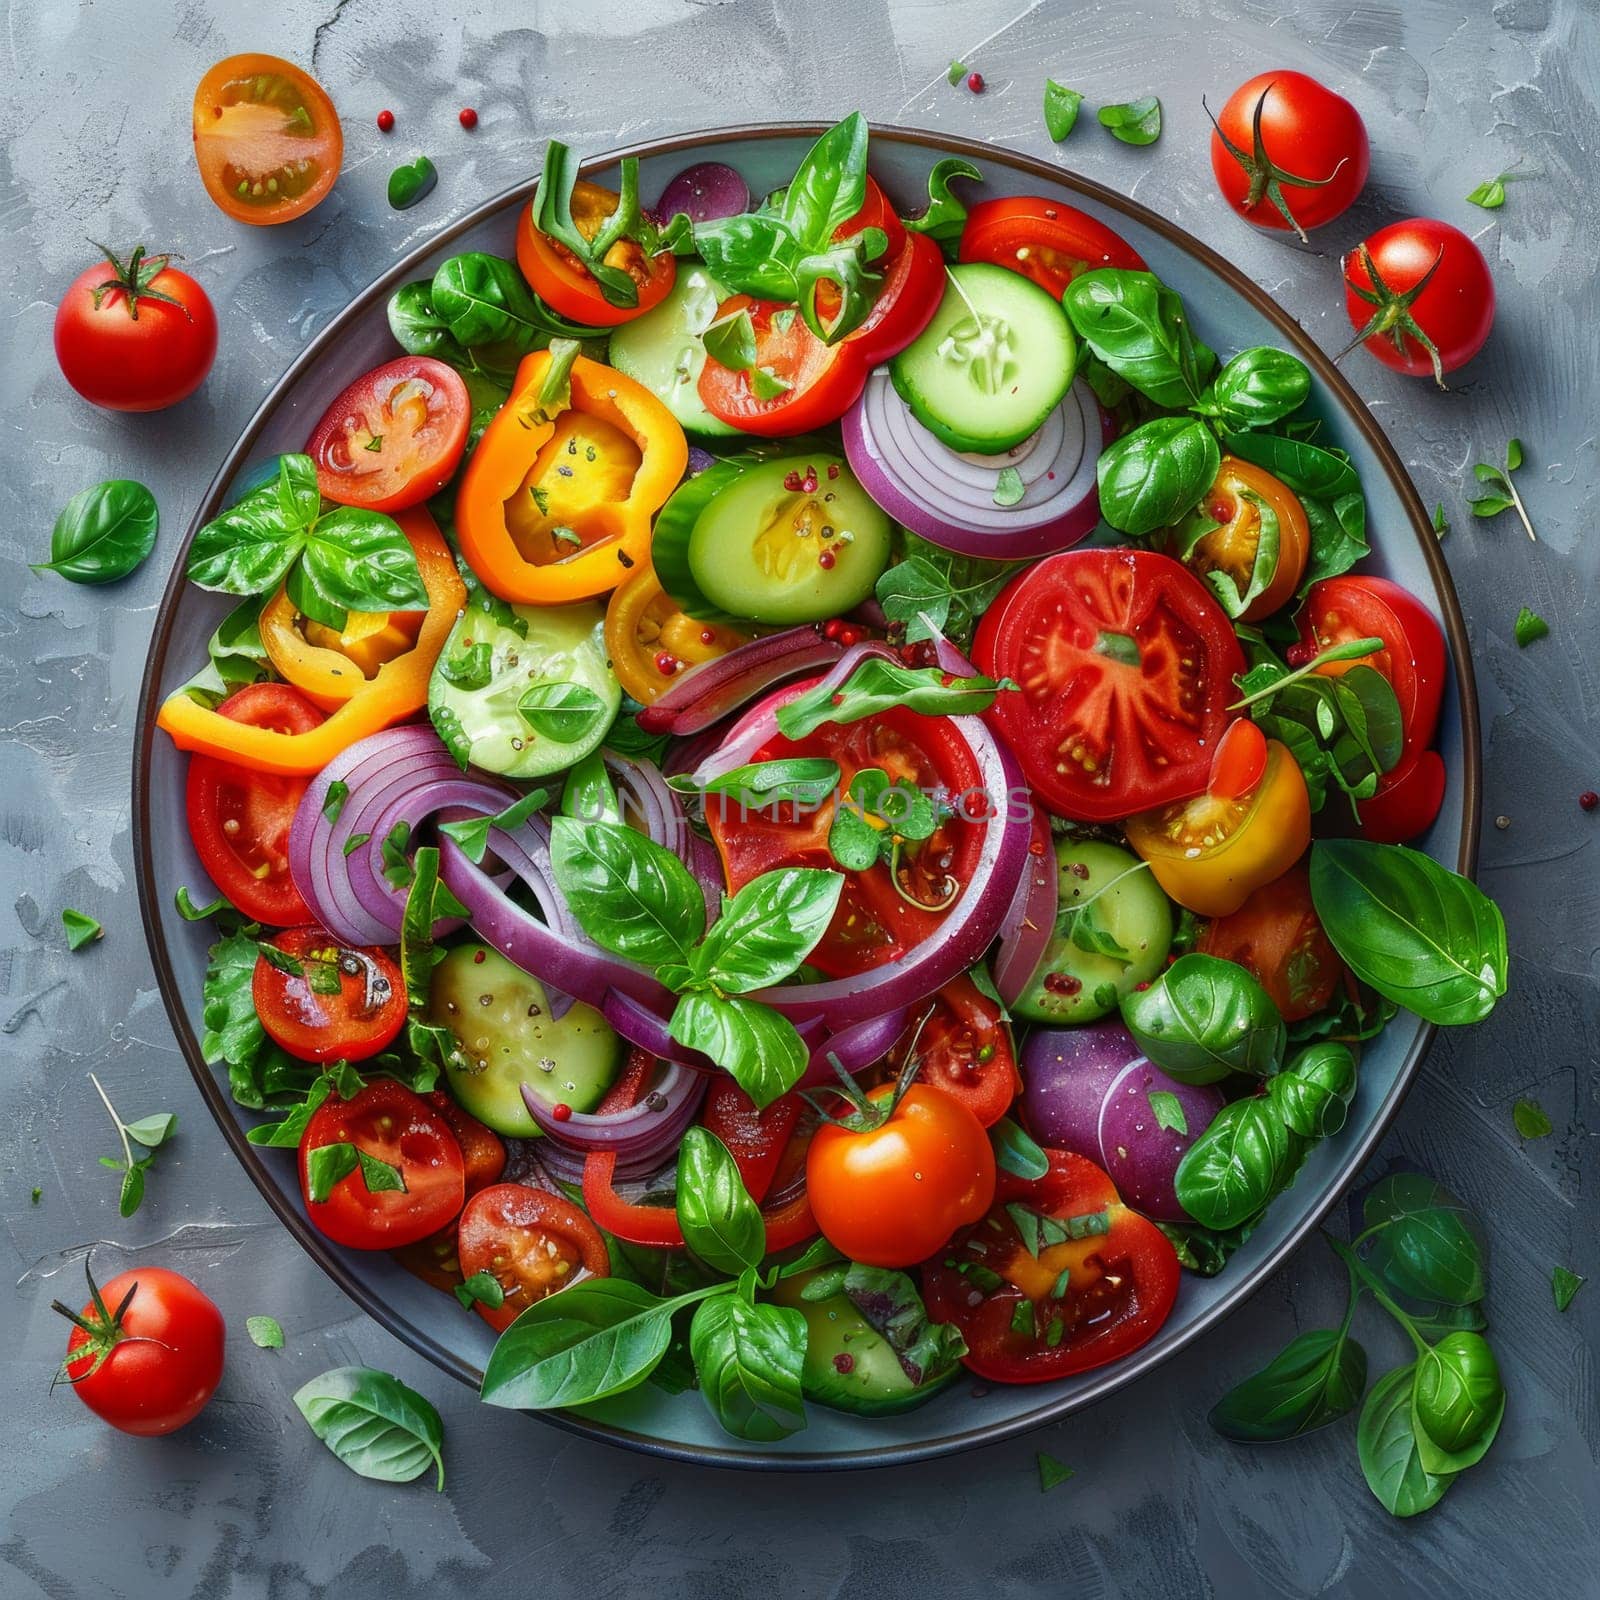 Top view of a bowl of salad with tomatoes, cucumbers, and onions in a grey rustic background by papatonic